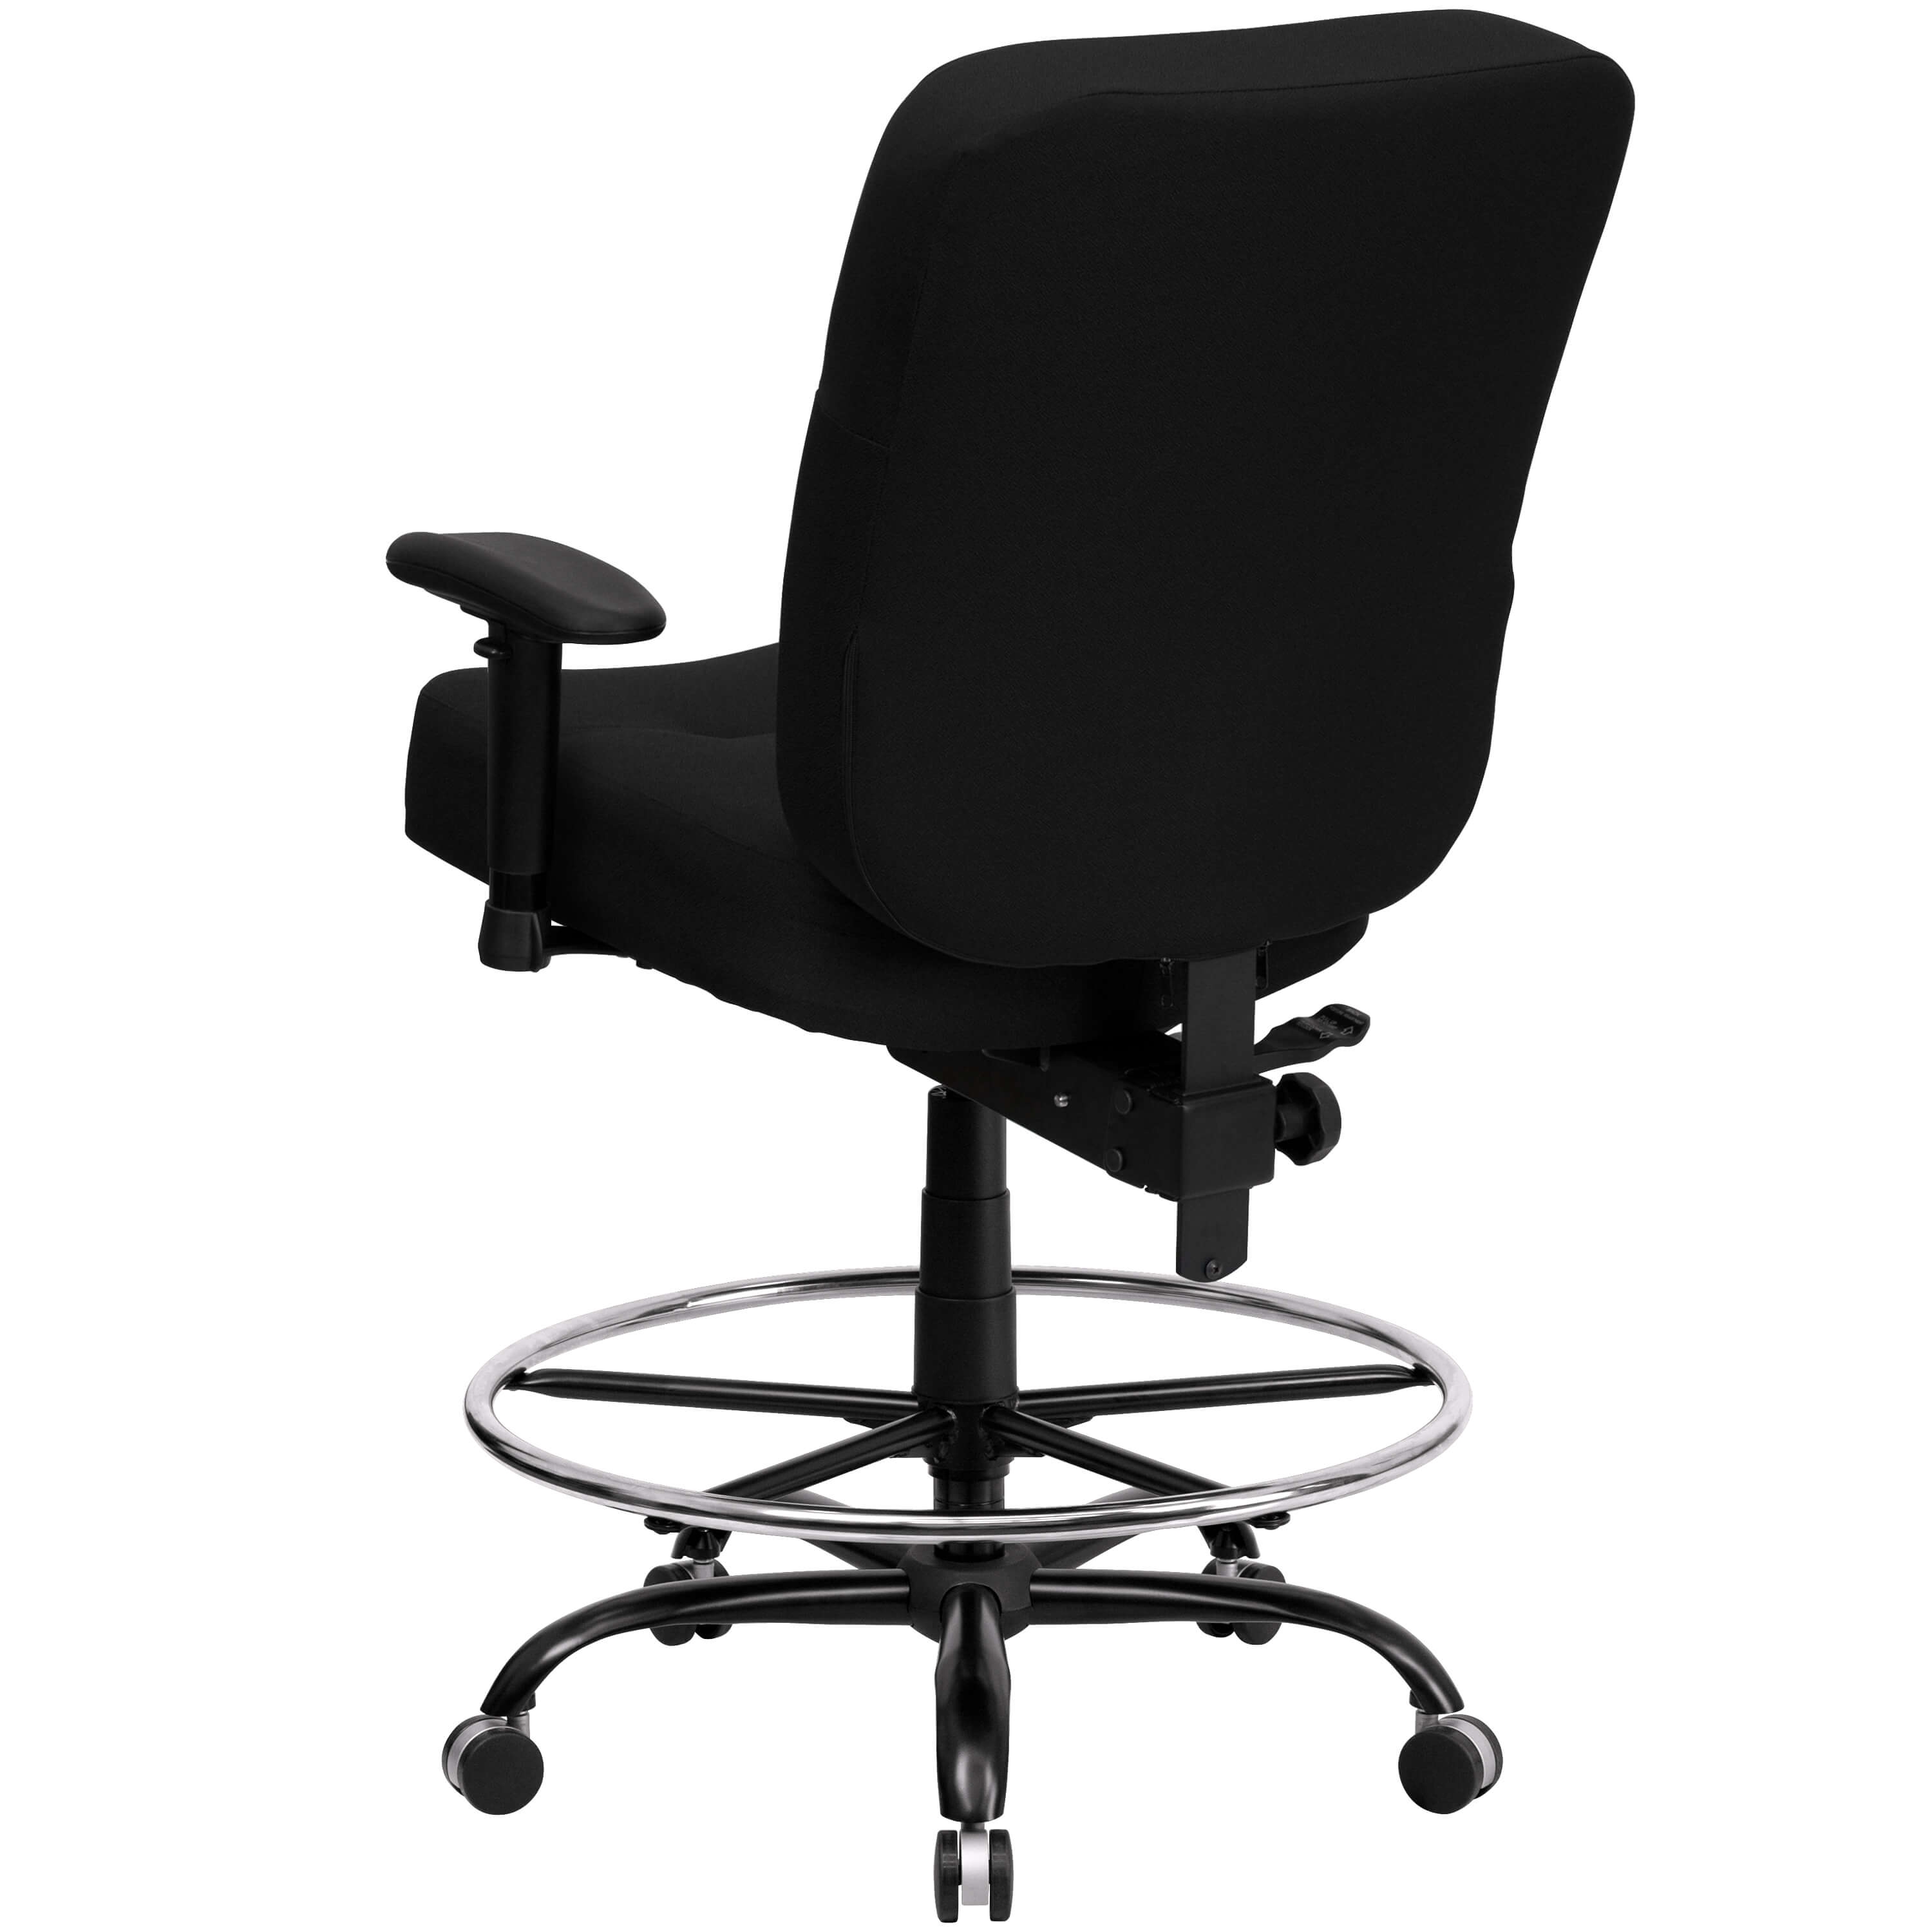 Large size office chairs back view